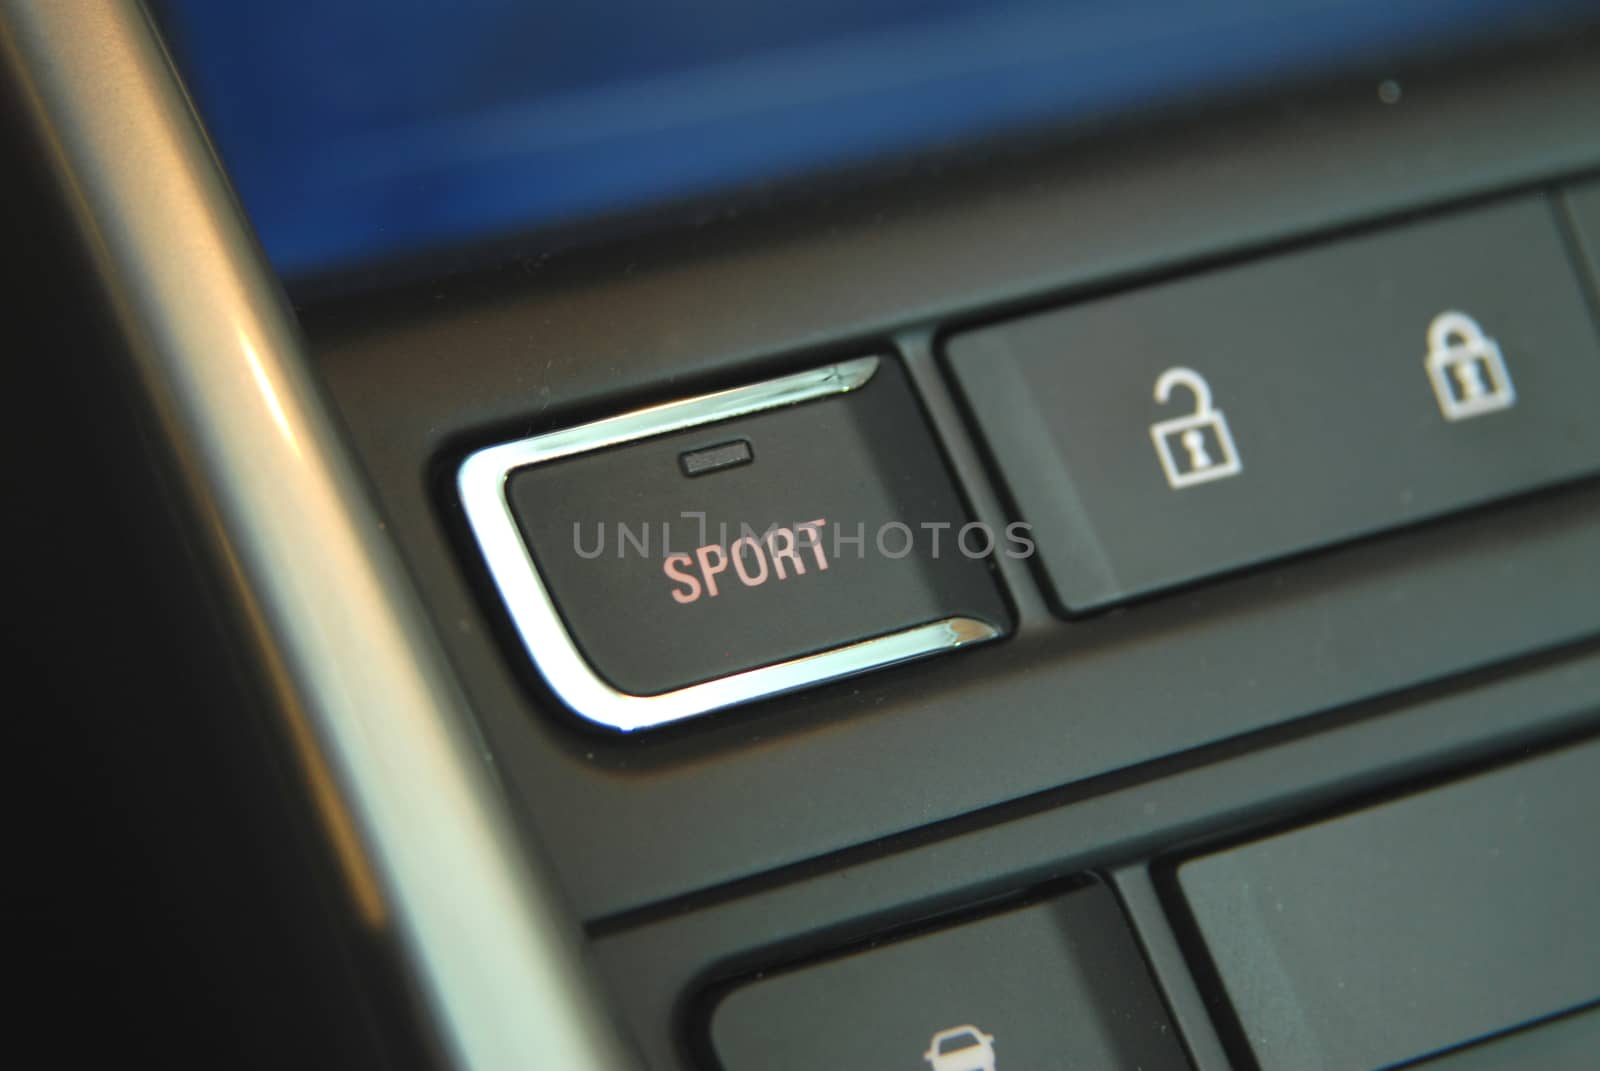 sport button on the dashboard of the car